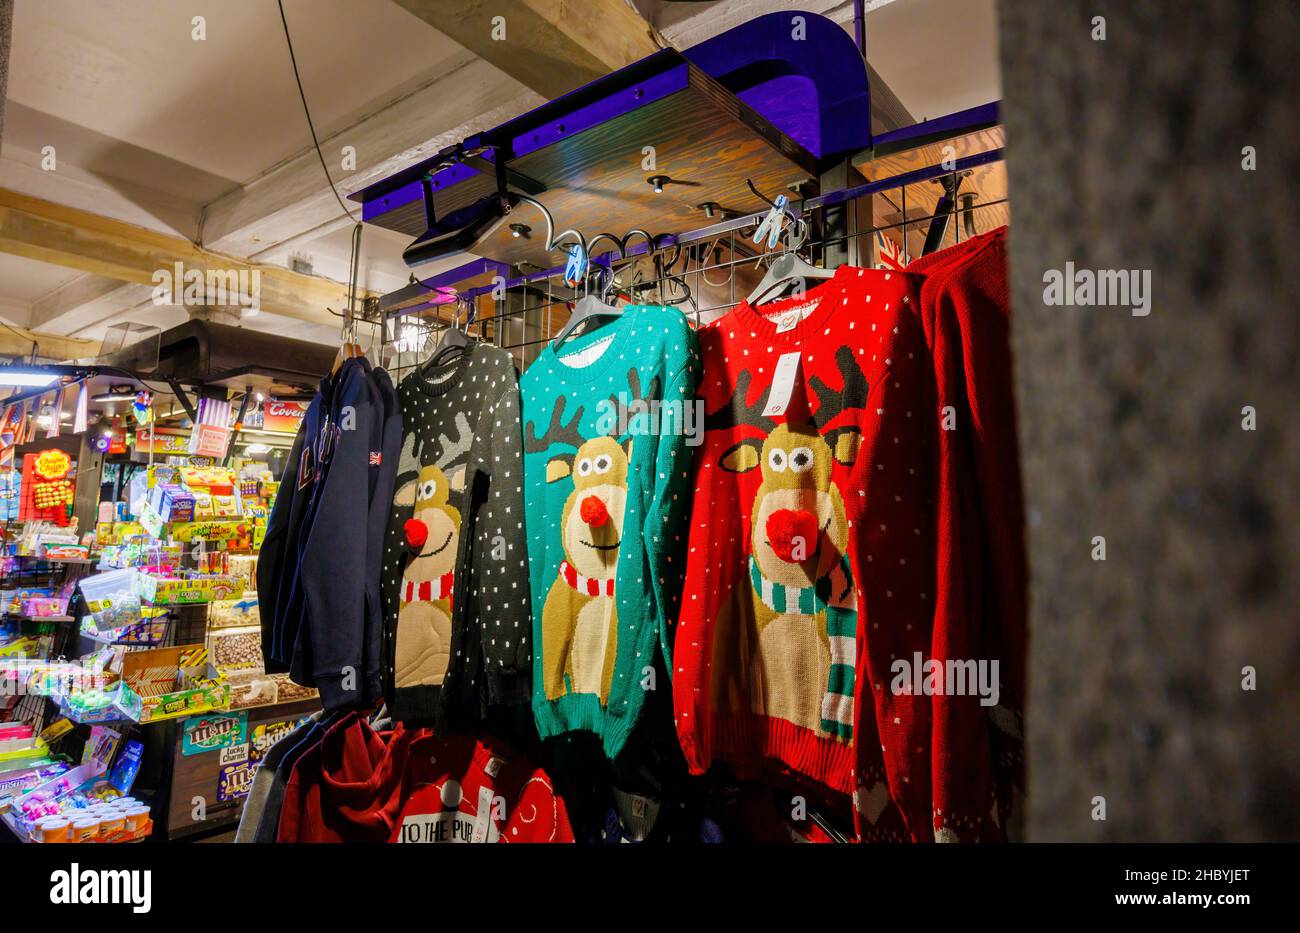 Typical colourful seasonal Rudolph the reindeer sweaters on display for sale in a stall in Covent Garden, London WC2 Stock Photo